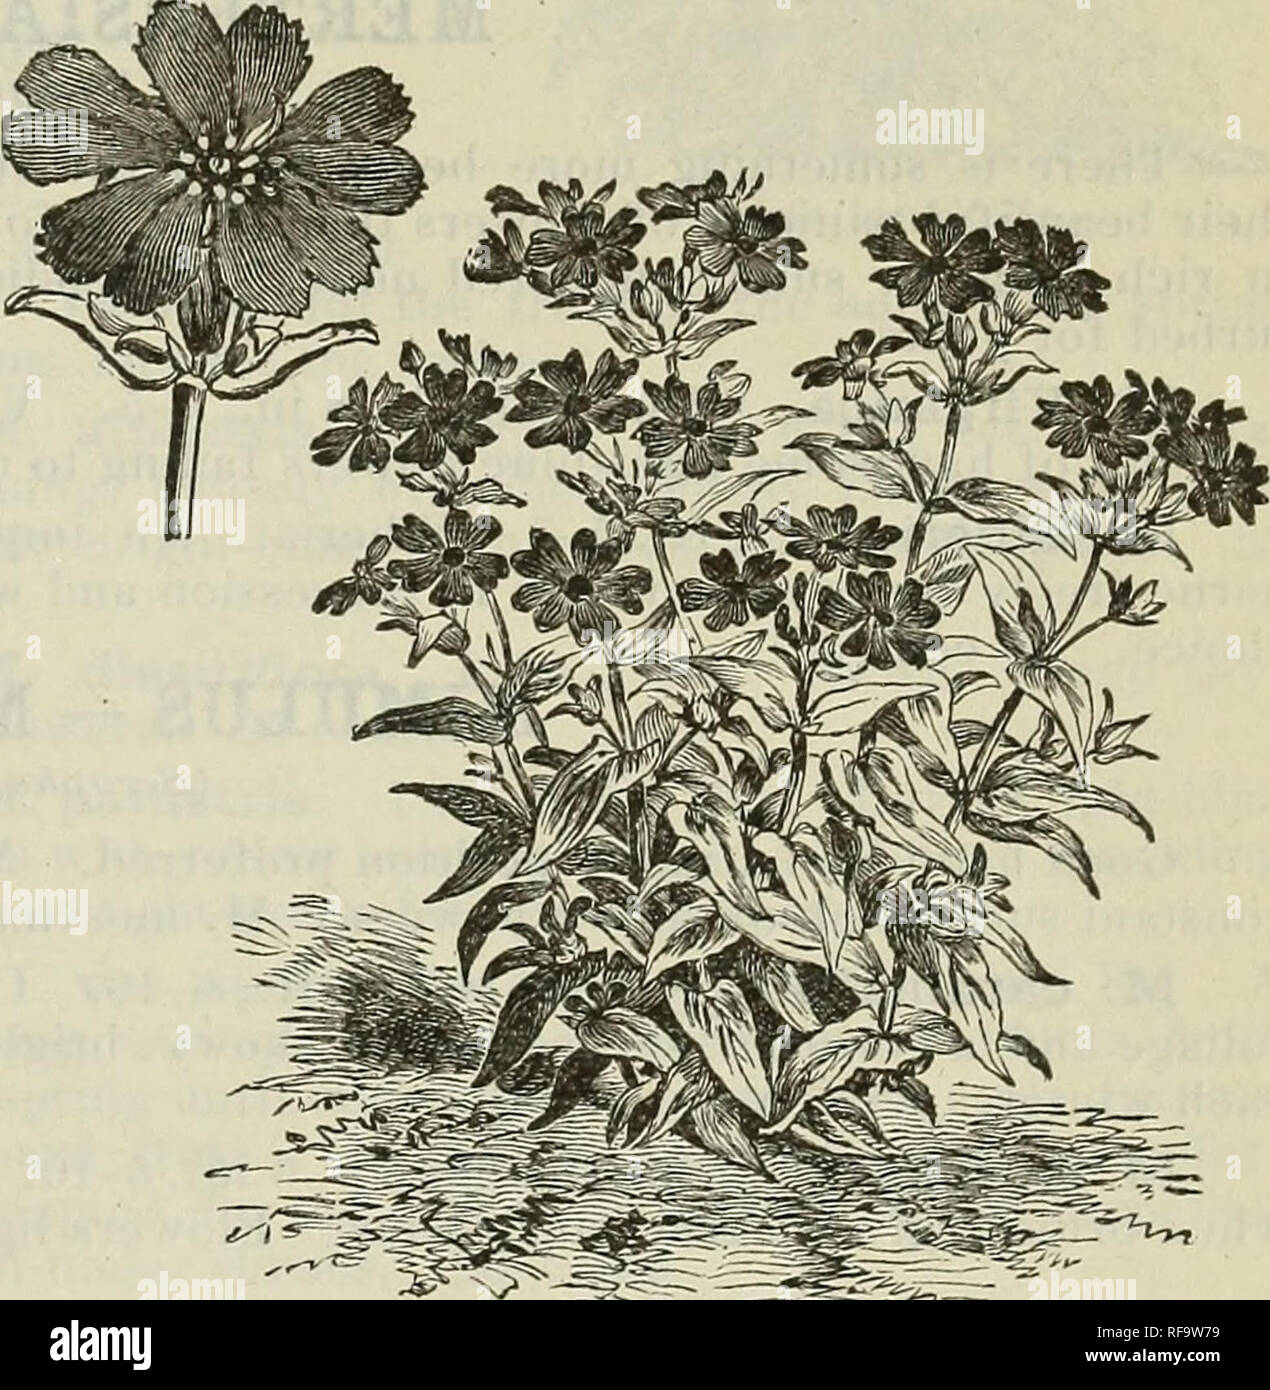 . Catalogue of hardy ornamental trees, shrubs, and vines, hardy flowers and large and small fruits. Nurseries (Horticulture) Massachusetts Catalogs; Plants, Ornamental Catalogs; Trees Seedlings Catalogs; Ornamental shrubs Catalogs; Flowers Catalogs; Fruit trees Seedlings Catalogs; Fruit Catalogs. Lychnis alpina. Very double, slightly fragrant, deep-red flowers in clusters, and borne from early spring until late summer. Very choice for cutting pur- poses. 30 cents. L. Flos-cucculi var. fl, pi. [Double Cuckoo Flower.] 18 in., (5-9. Siberia. Handsome, finely cut, pure white flowers, sometimes tin Stock Photo